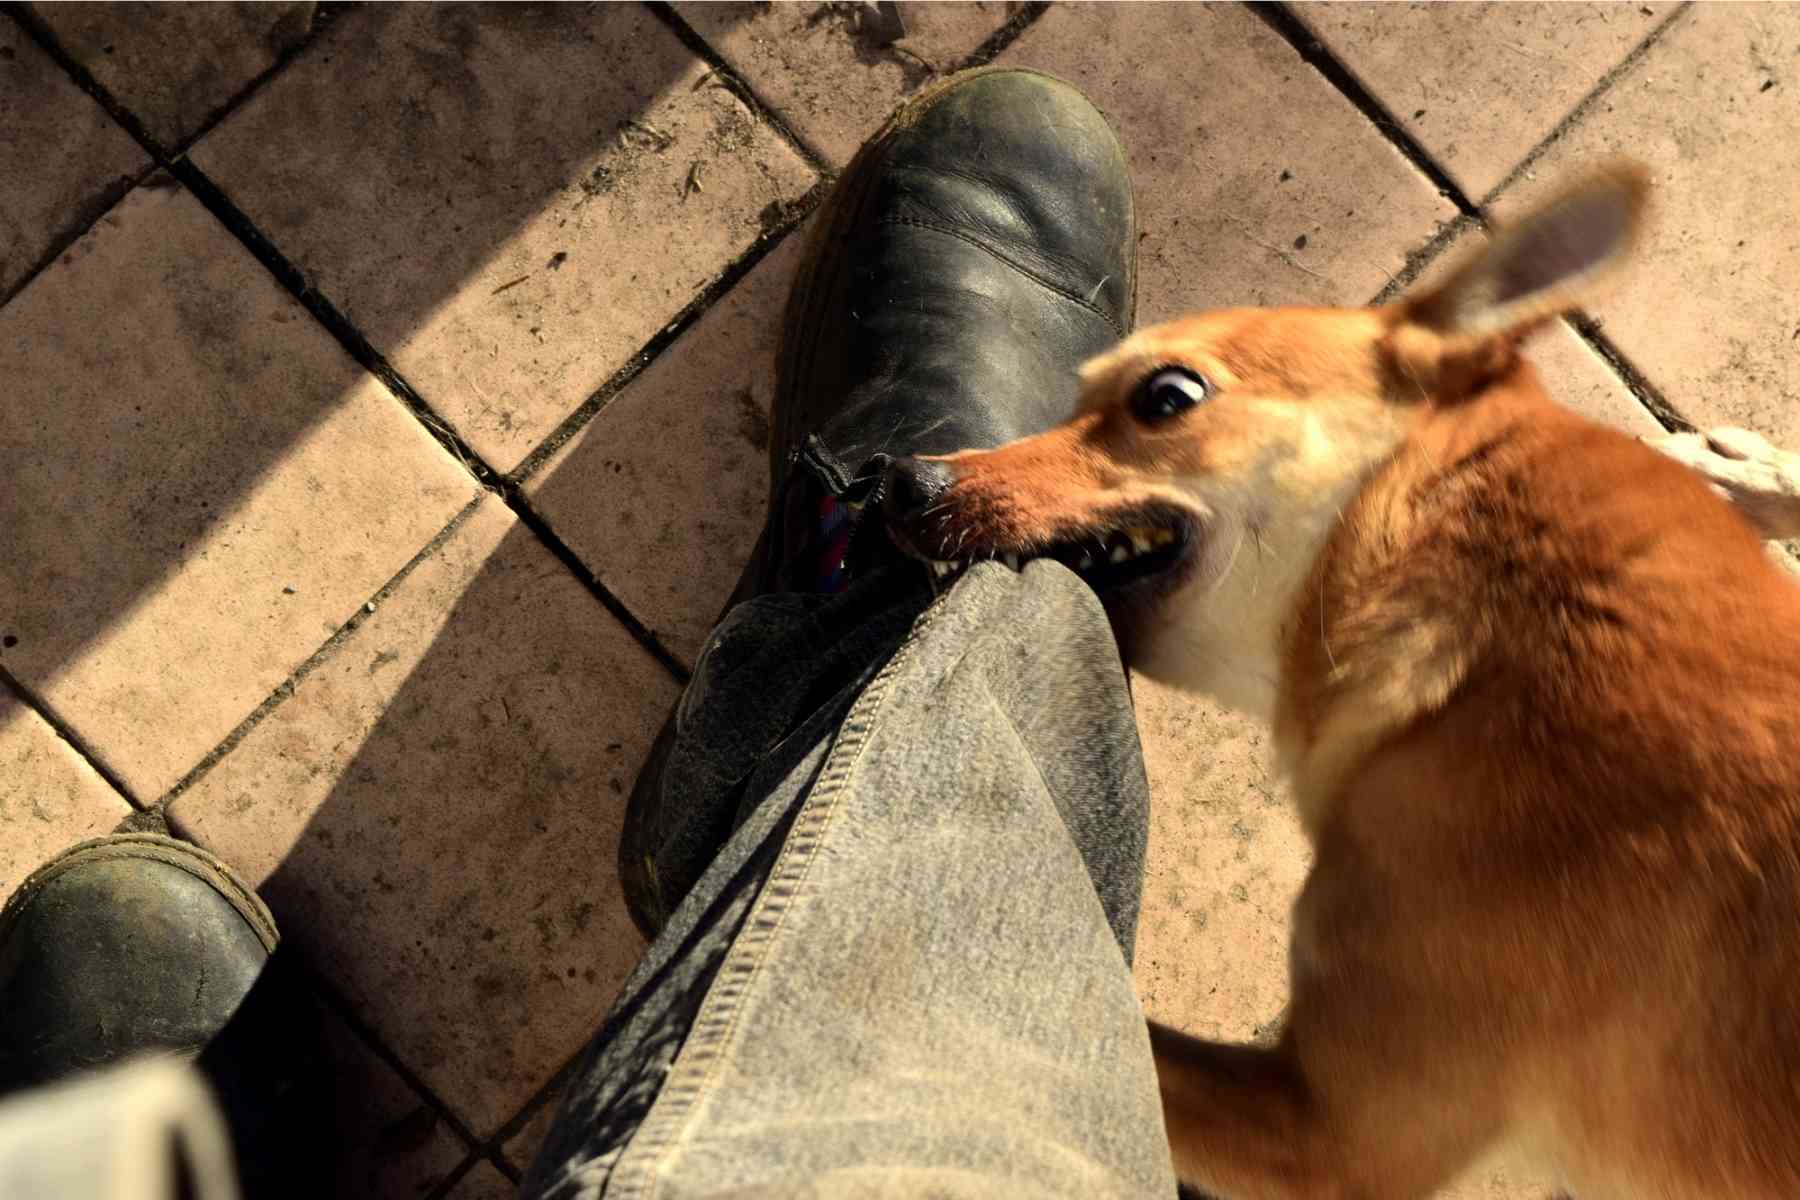 Cute small dog nibbling on owner's trousers